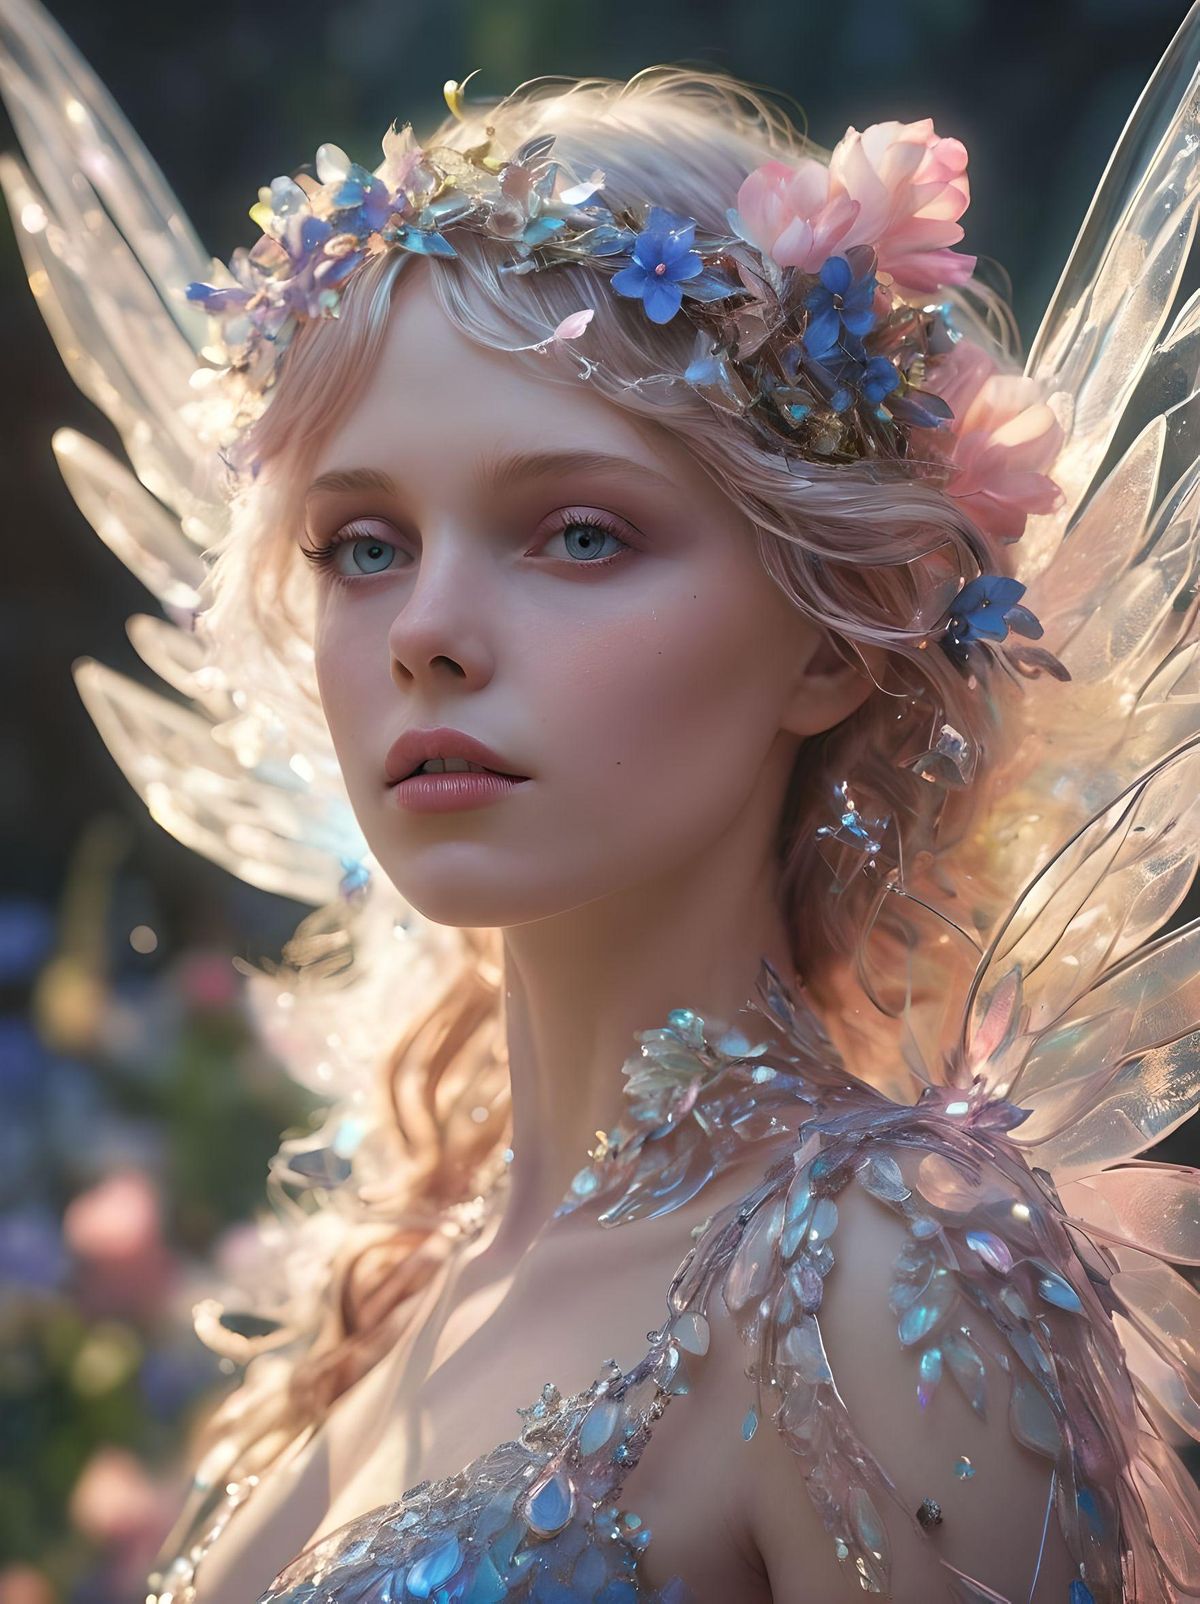 The Crystal Faerie is a delicate being made of pure crystalline energy, with wings that sparkle like diamonds in the sunlight. Its skin is translucent, revealing a network of glowing veins that pulse with magical energy. Hair flows in wispy tendrils of light, adorned with flowers that bloom in shades of pastel hues.